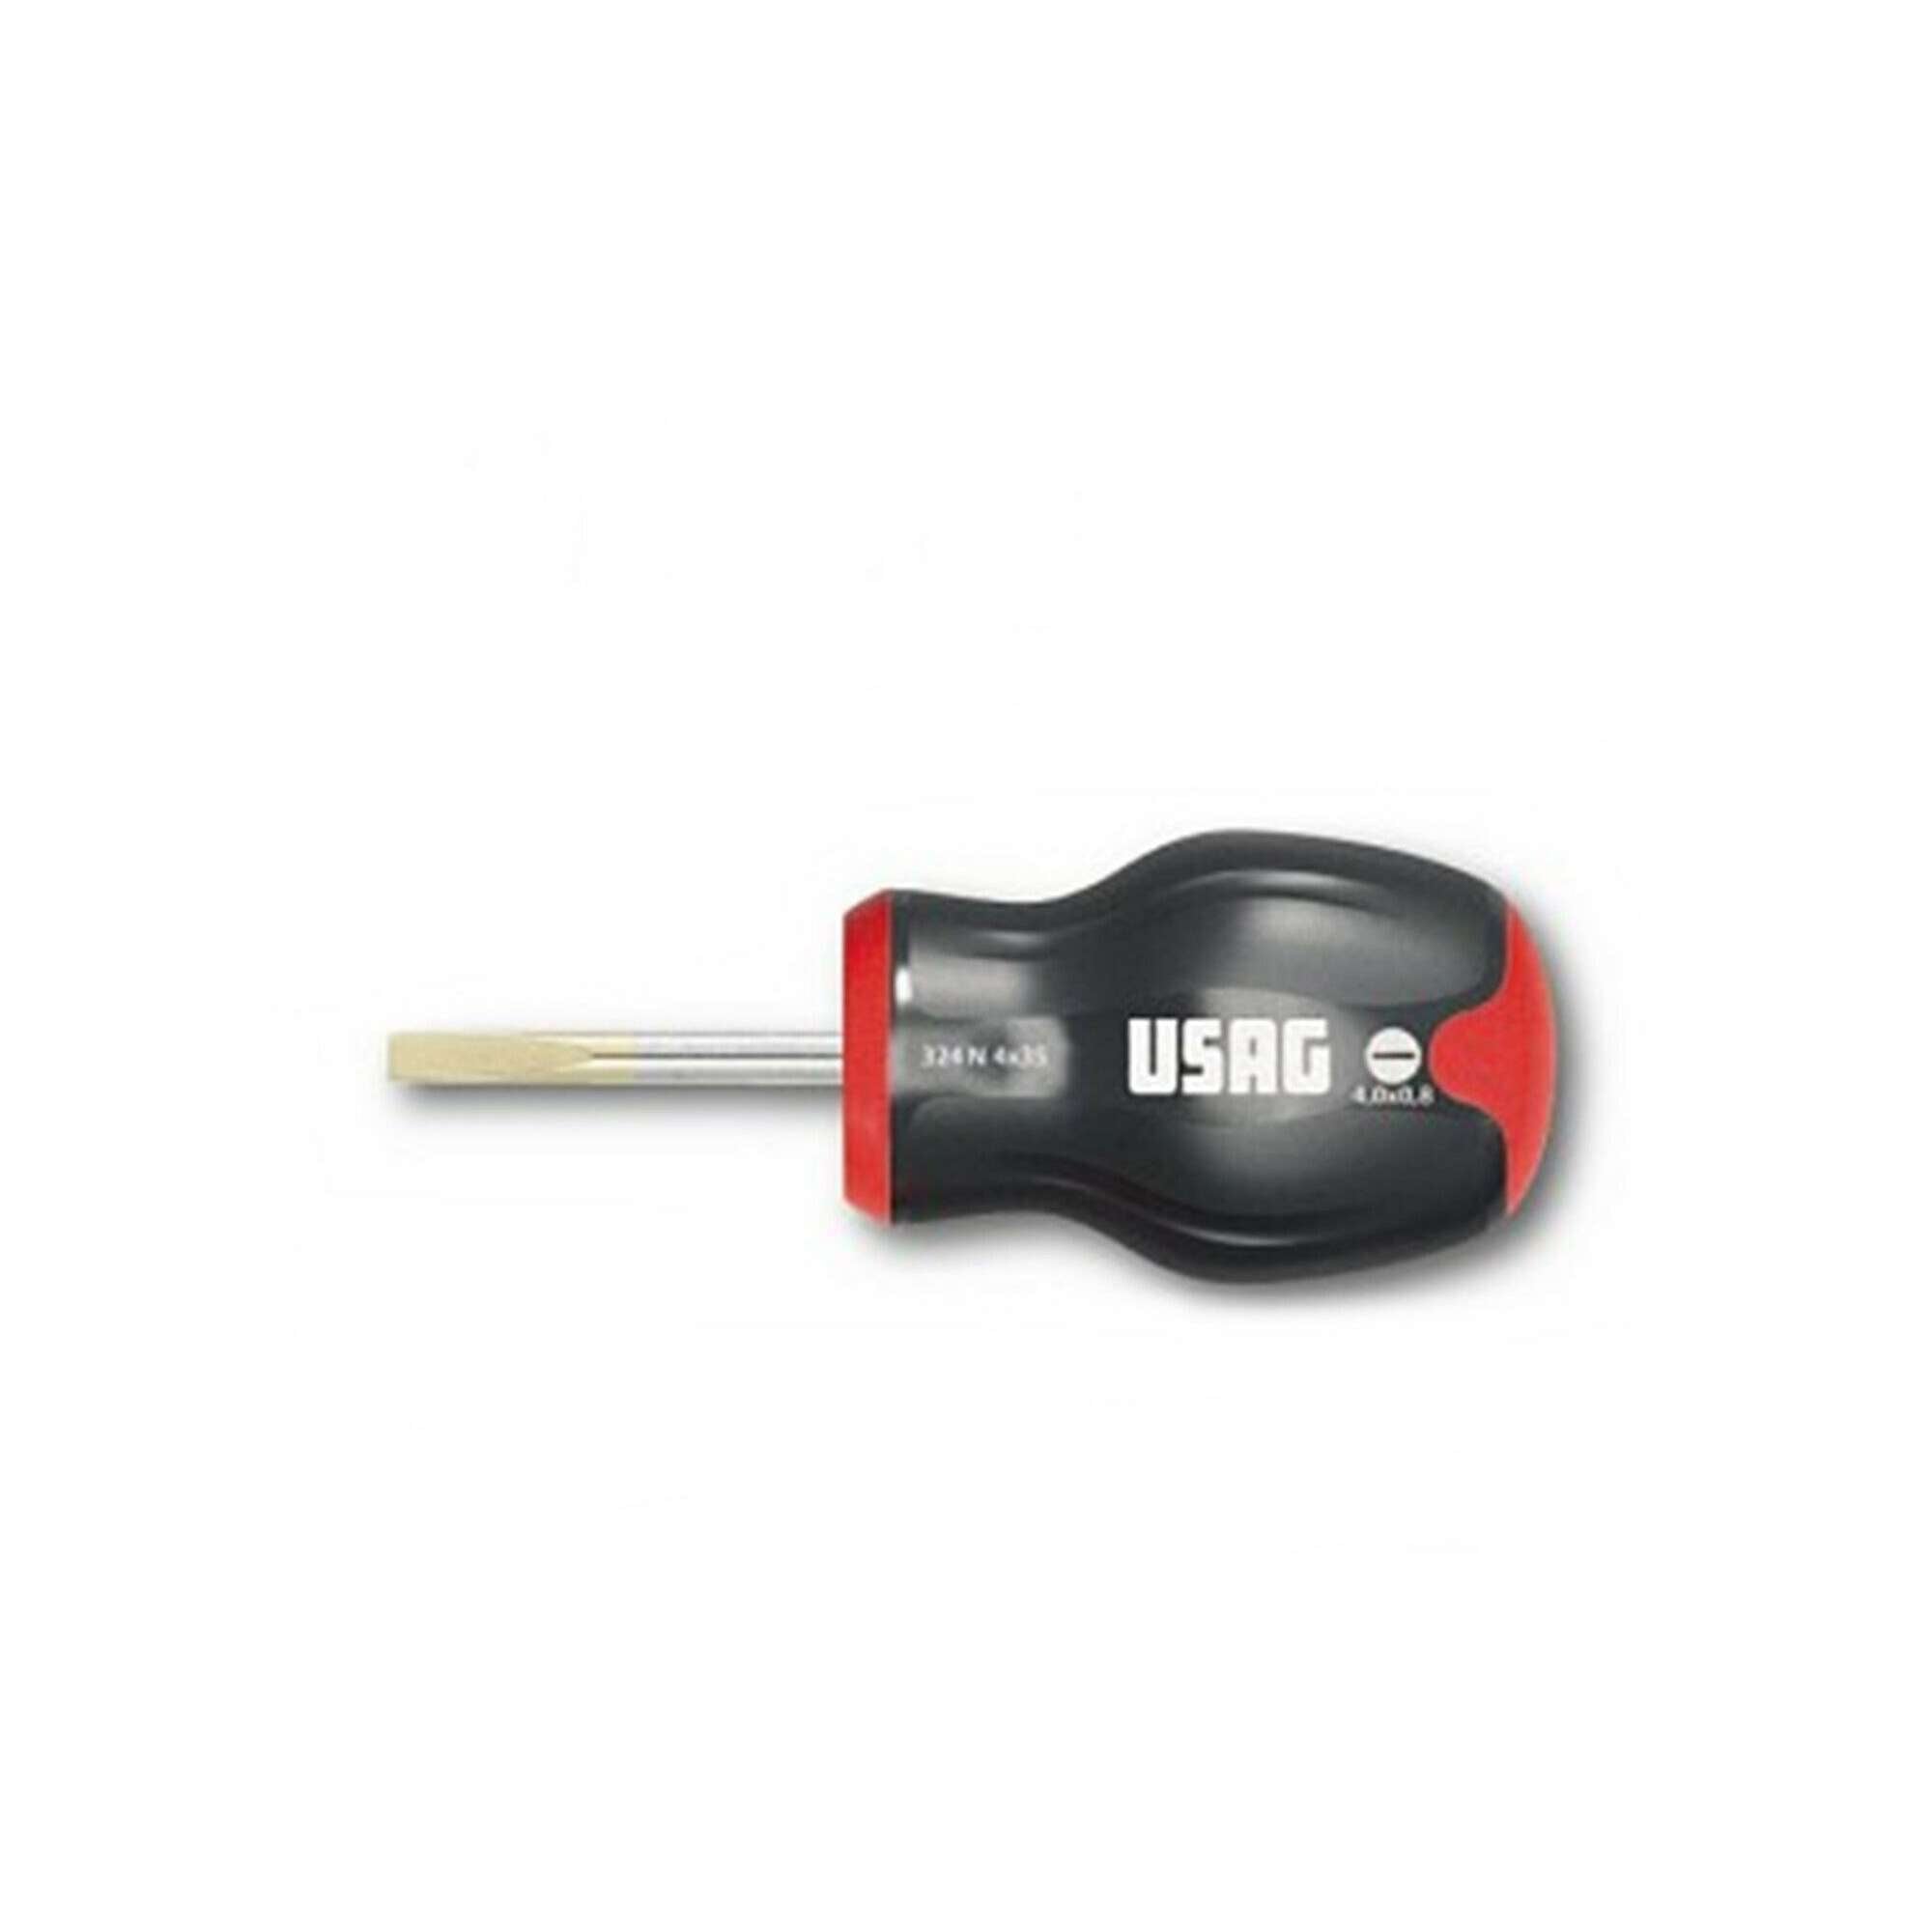 Screwdriver for slotted screws with M0 handle - Usag 324N